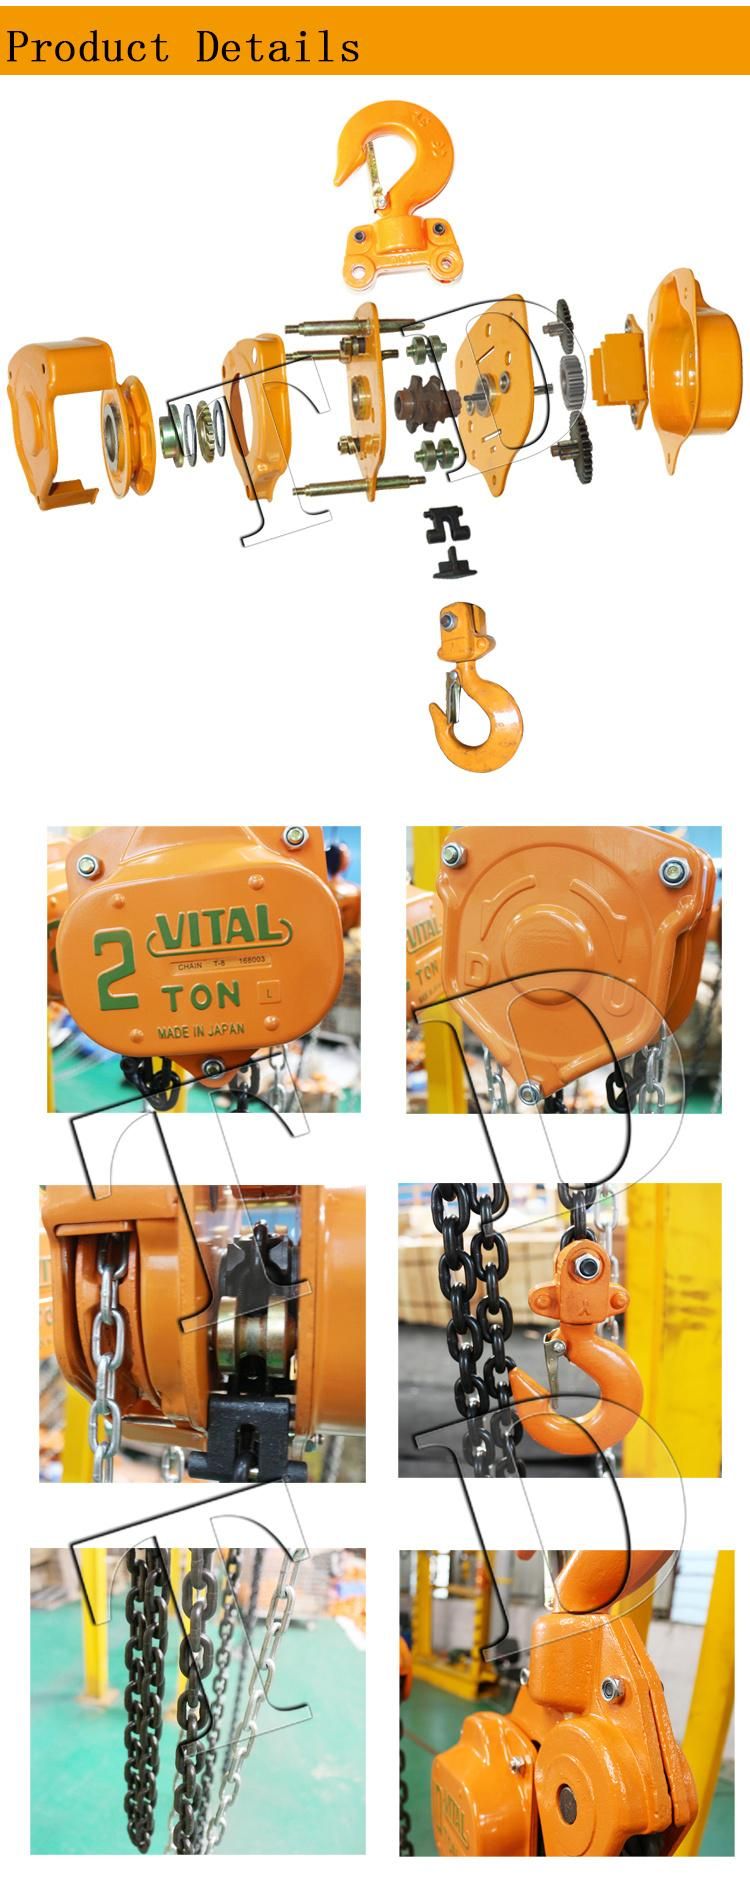 Hot Selling Type of Vt Chain Block Chain Hoist with G80 Chain